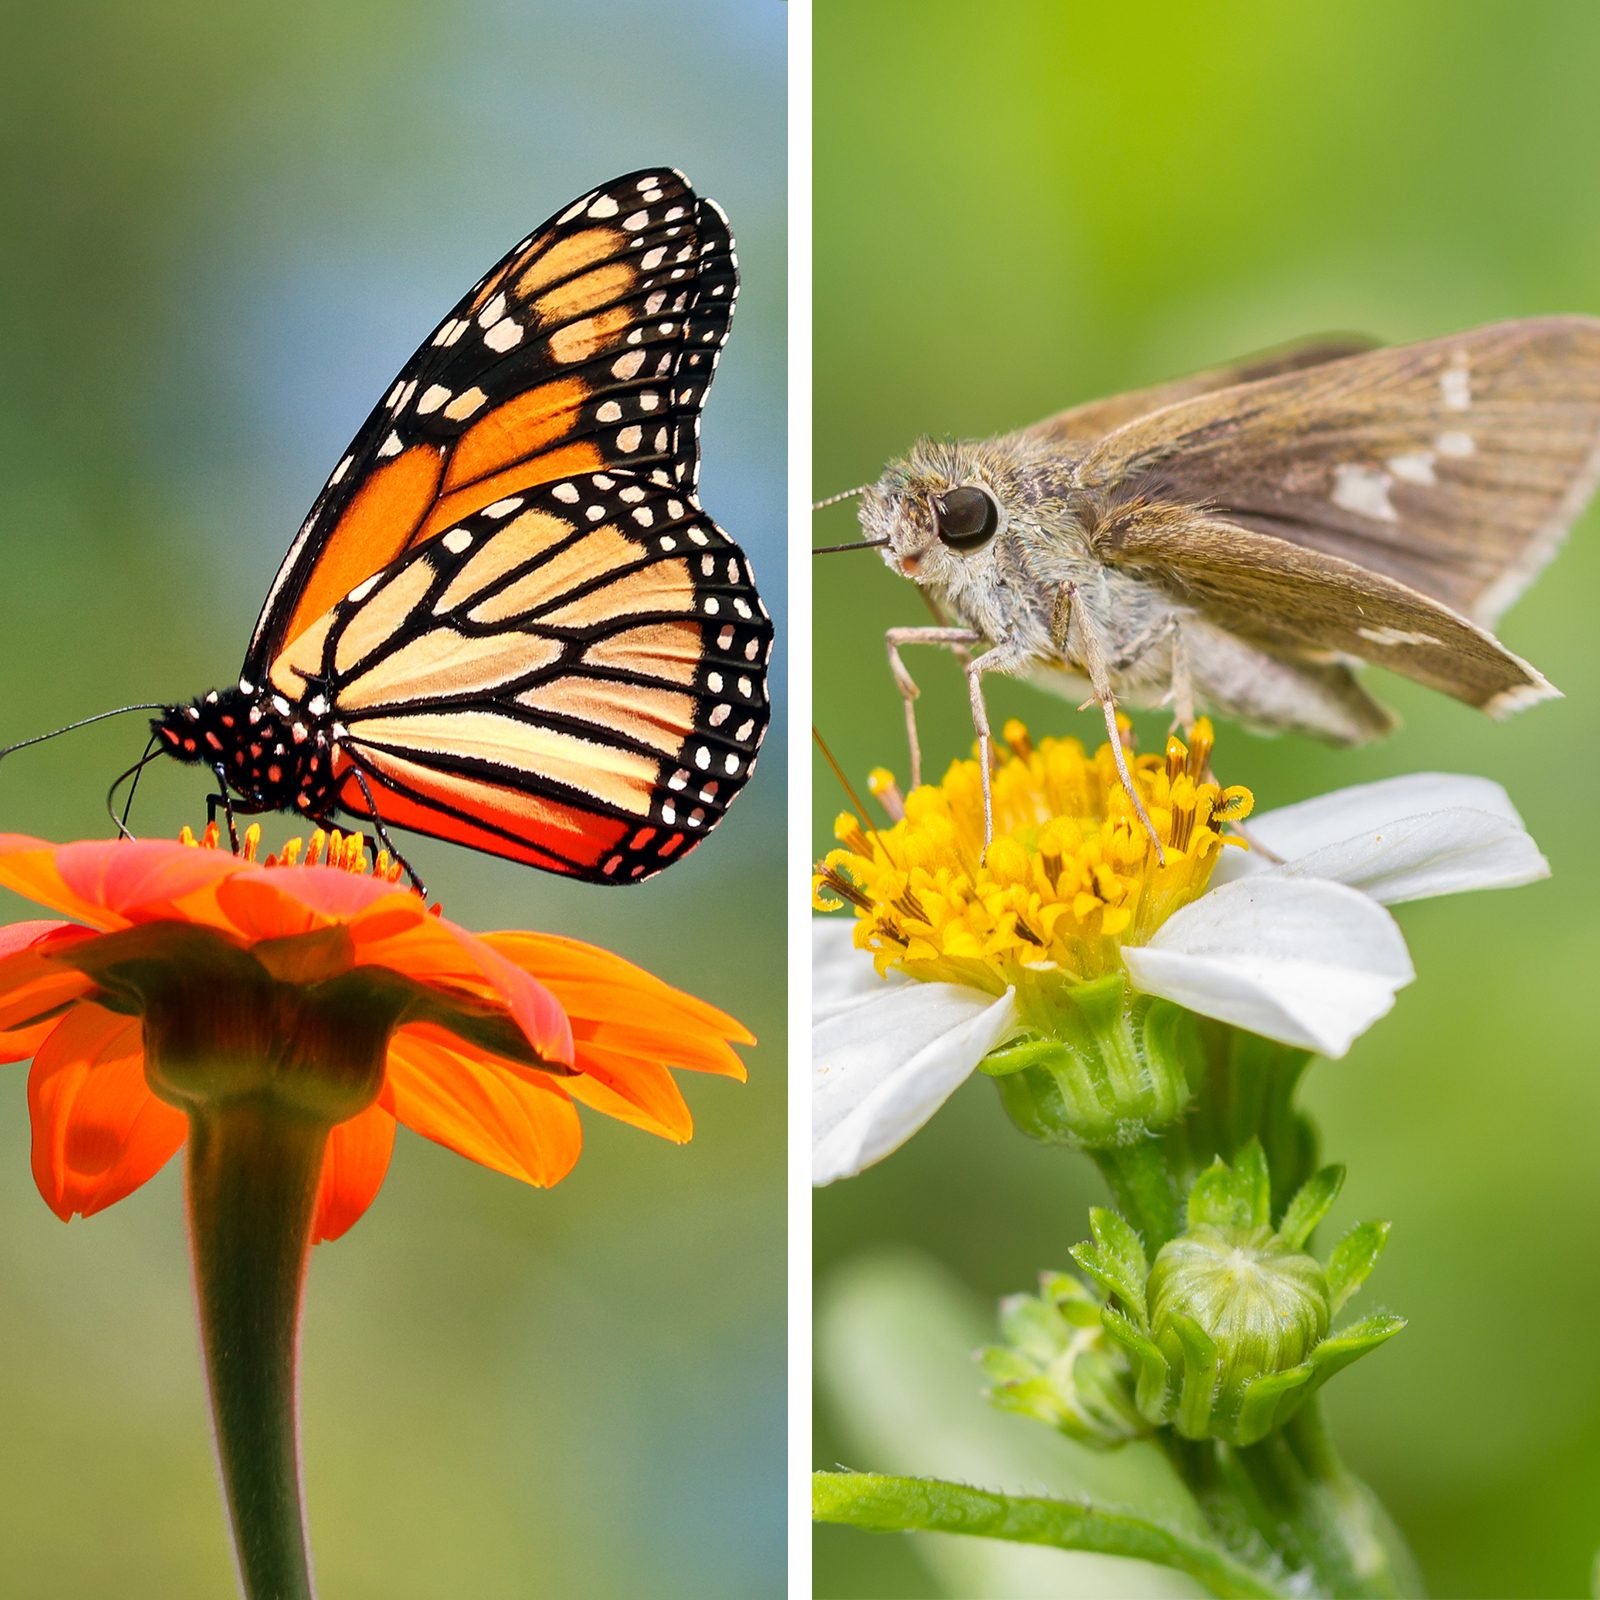 Butterfly vs. Moth: Which Is the Better Pollinator?